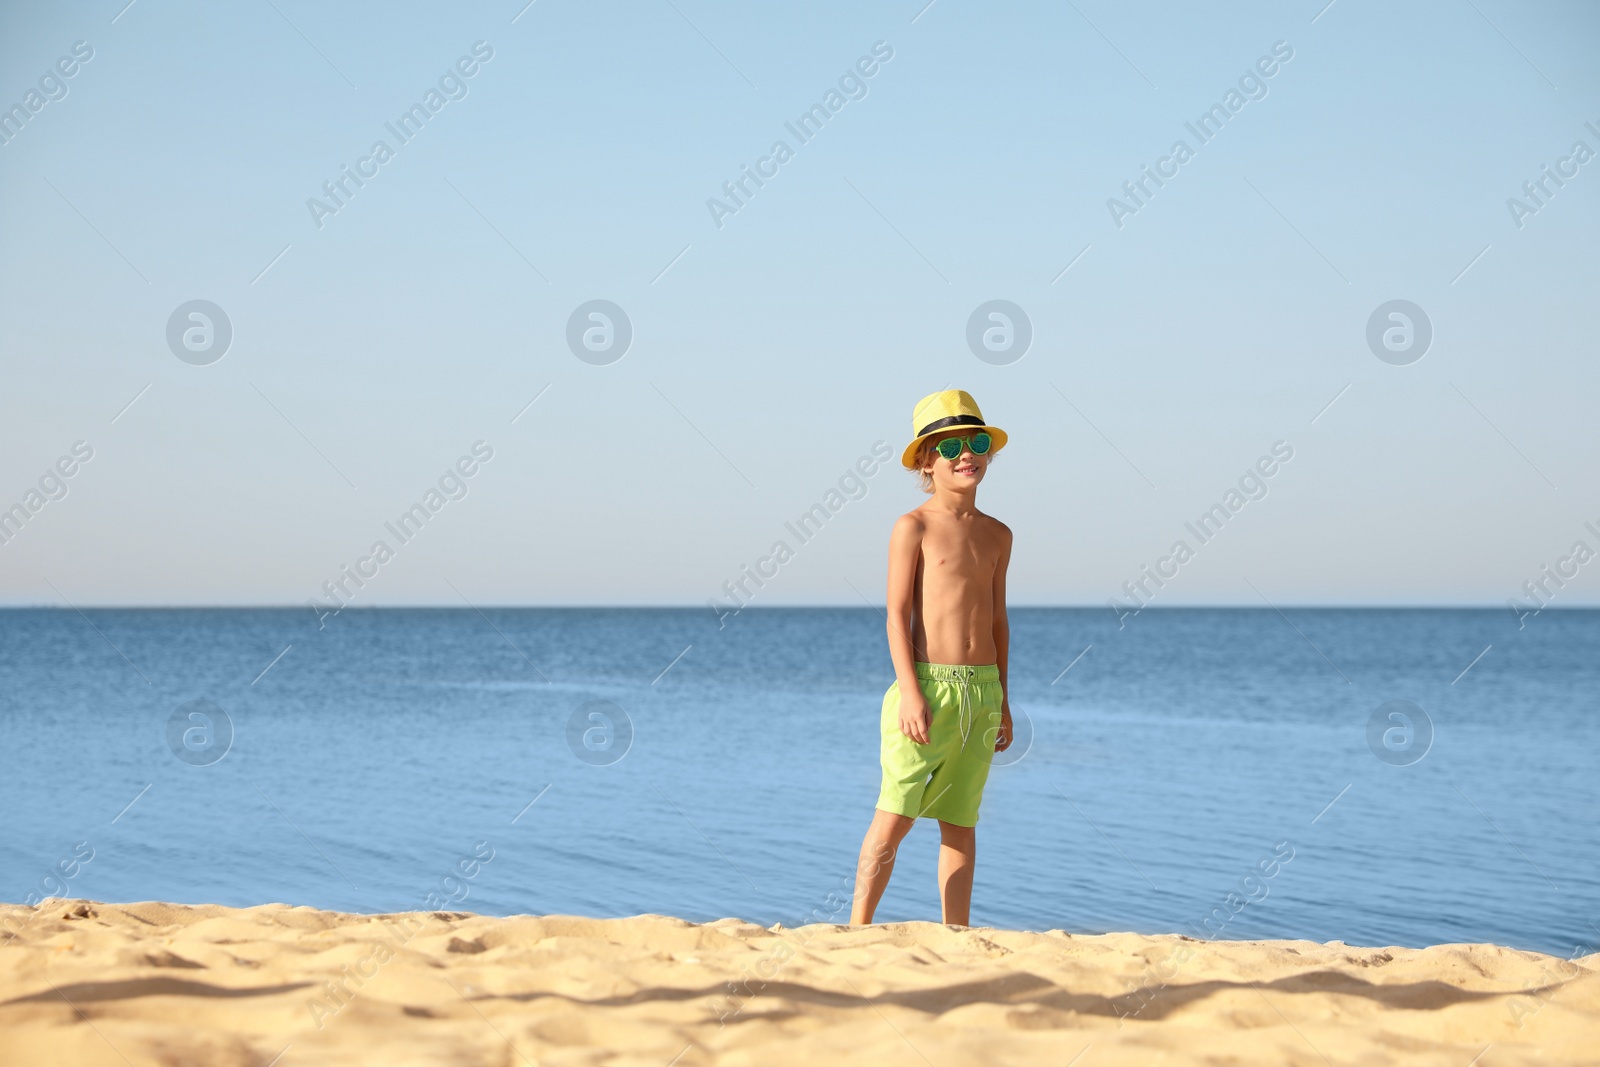 Photo of Cute little child at sandy beach on sunny day